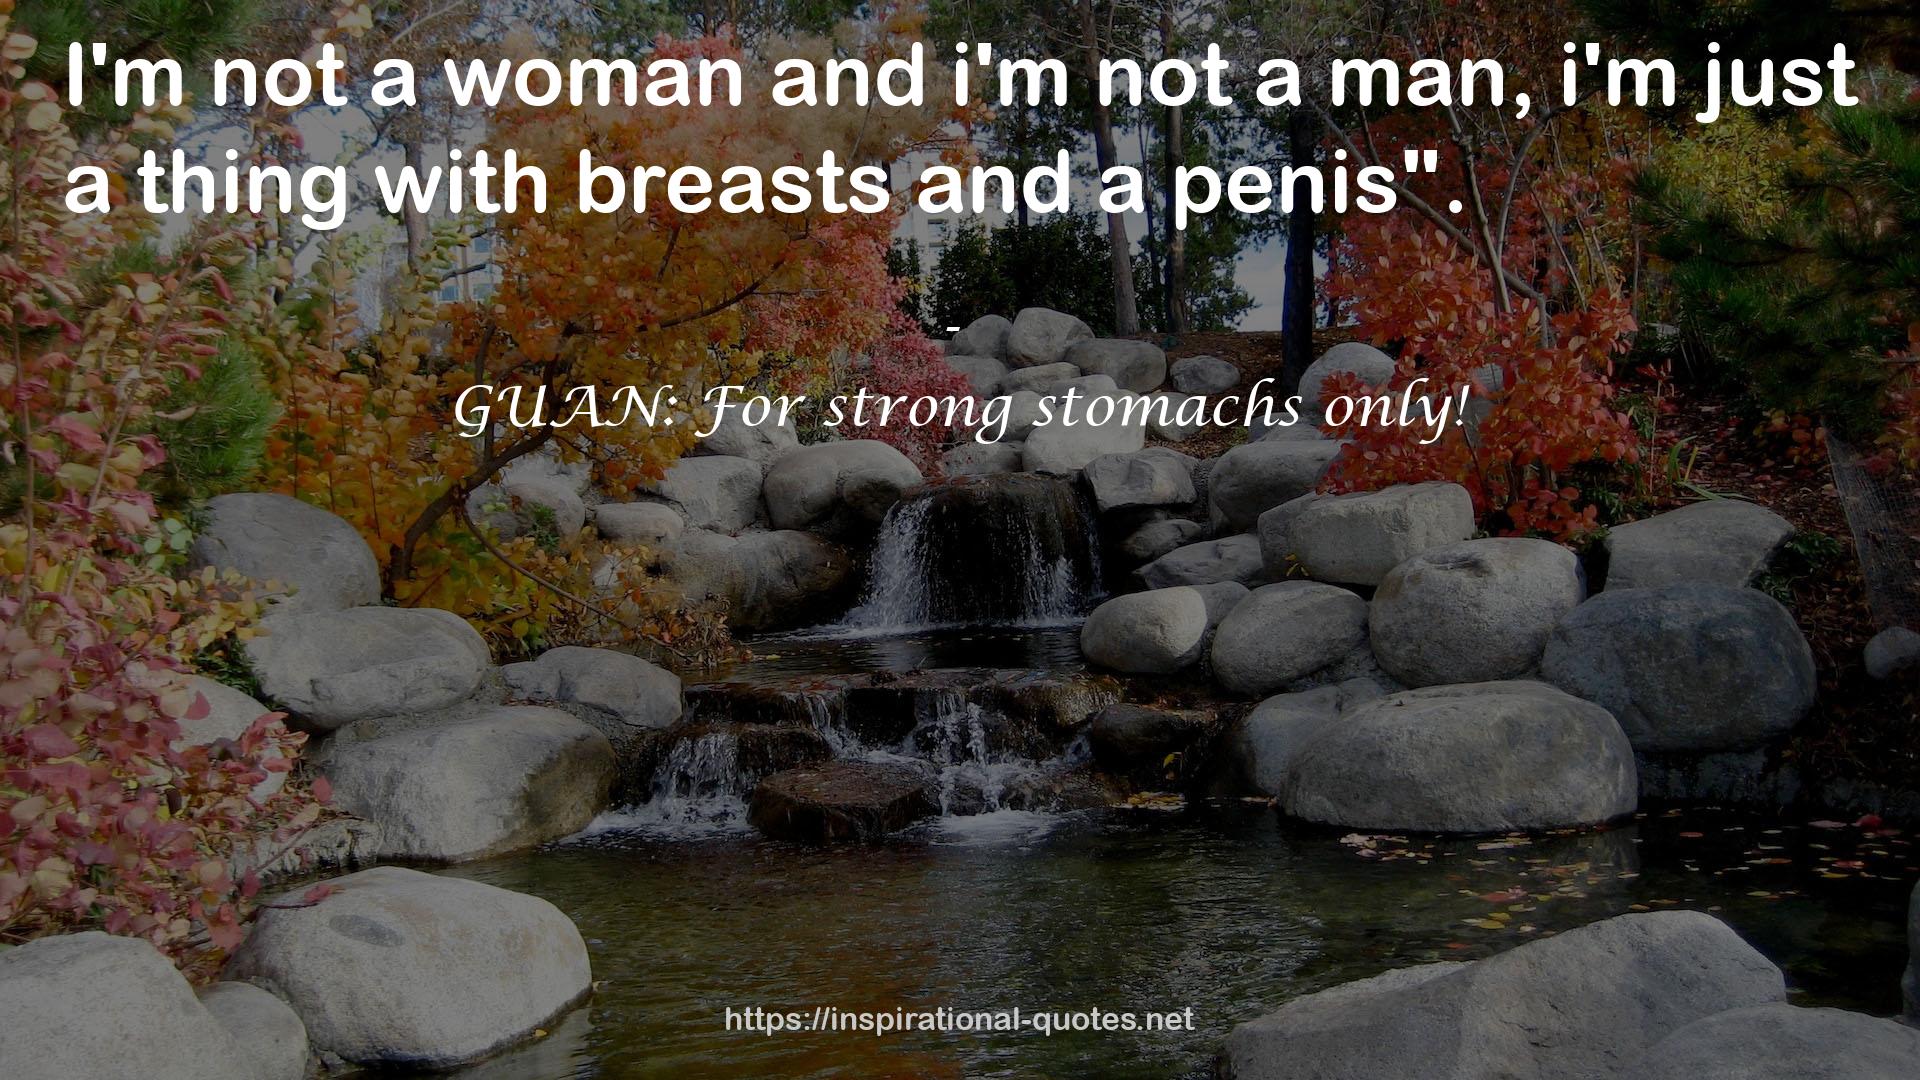 GUAN: For strong stomachs only! QUOTES